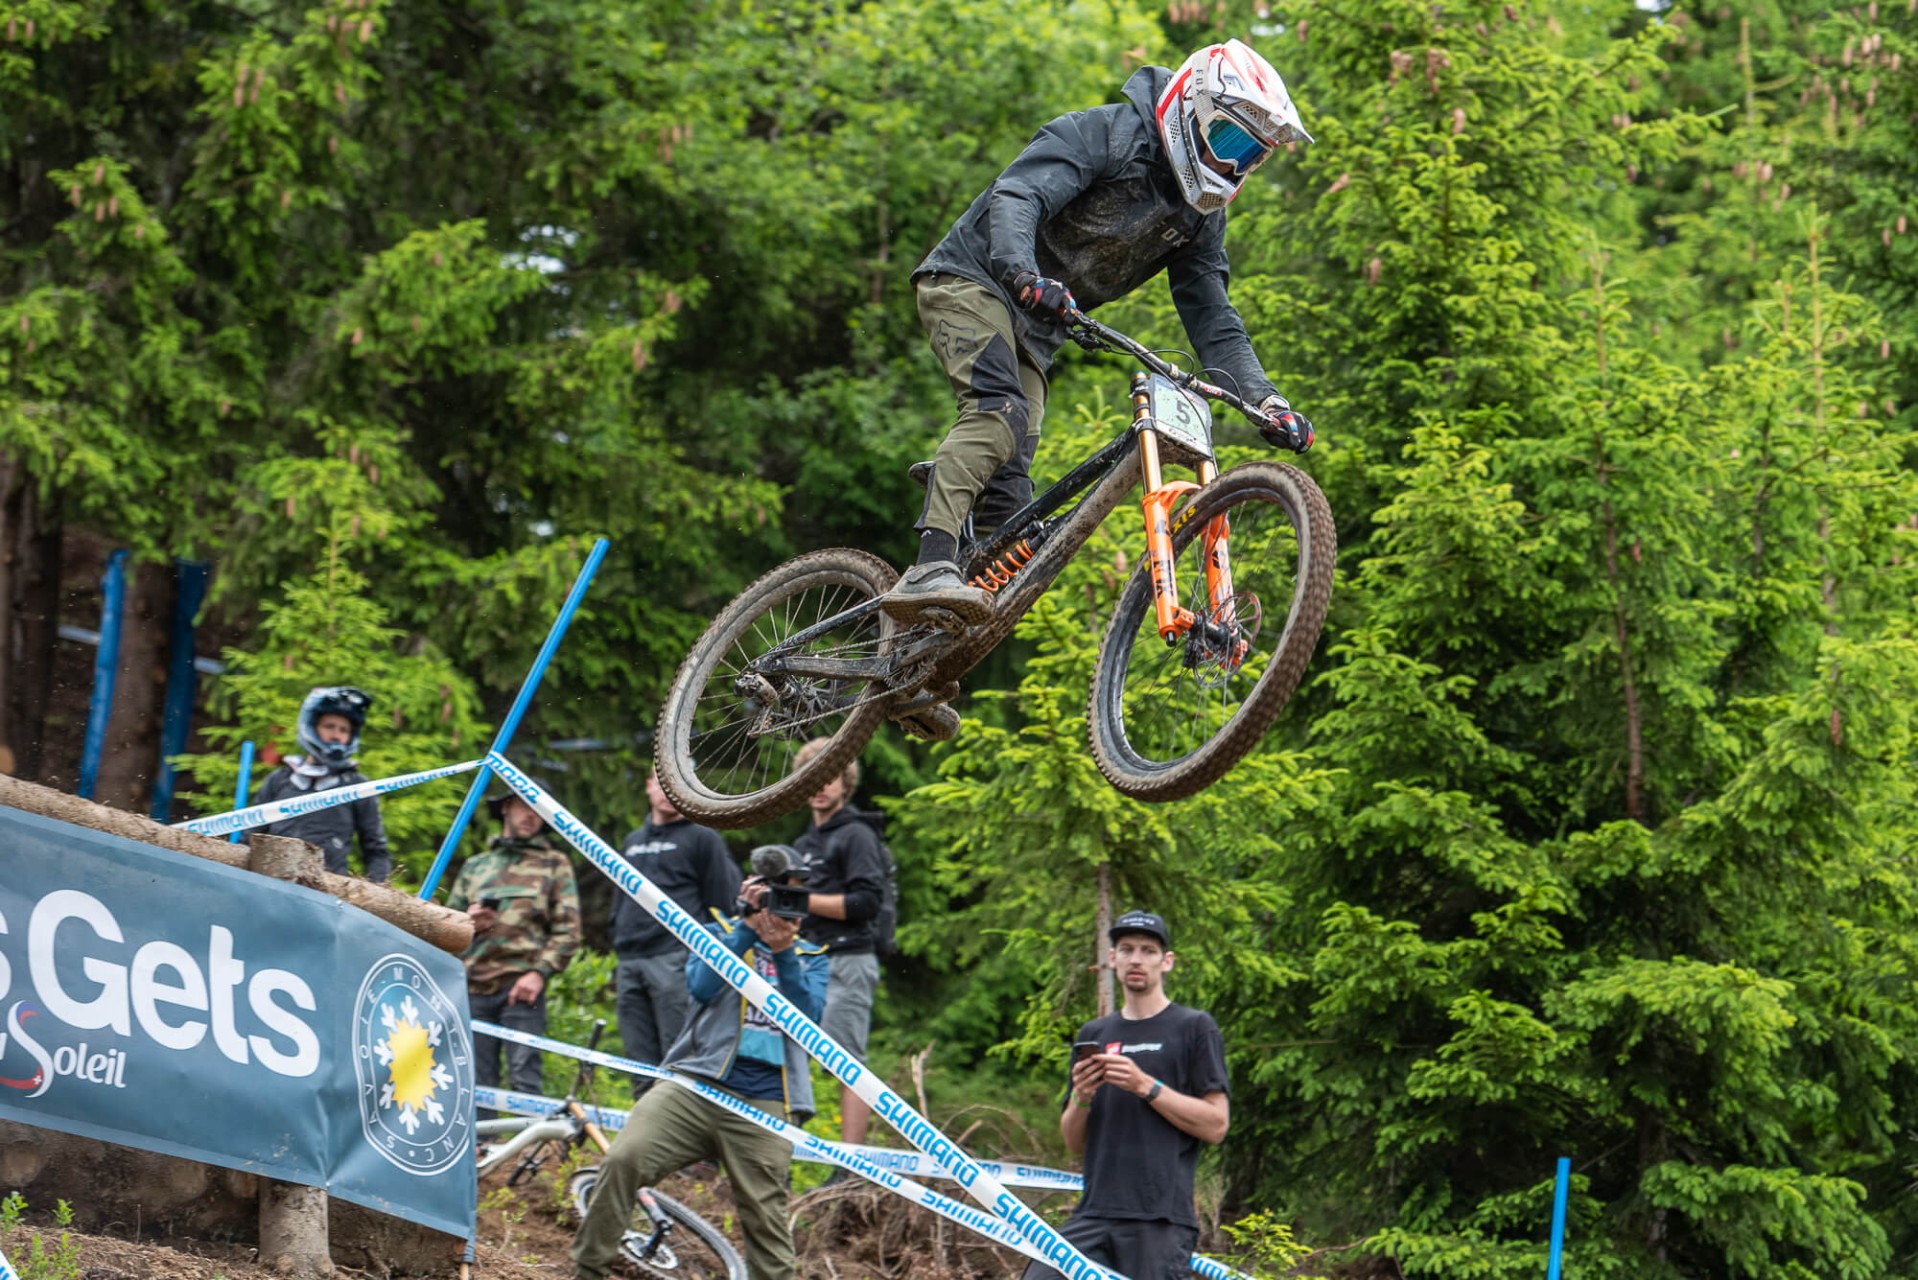 The Les Gets UCI Downhill MTB World Cup 2021